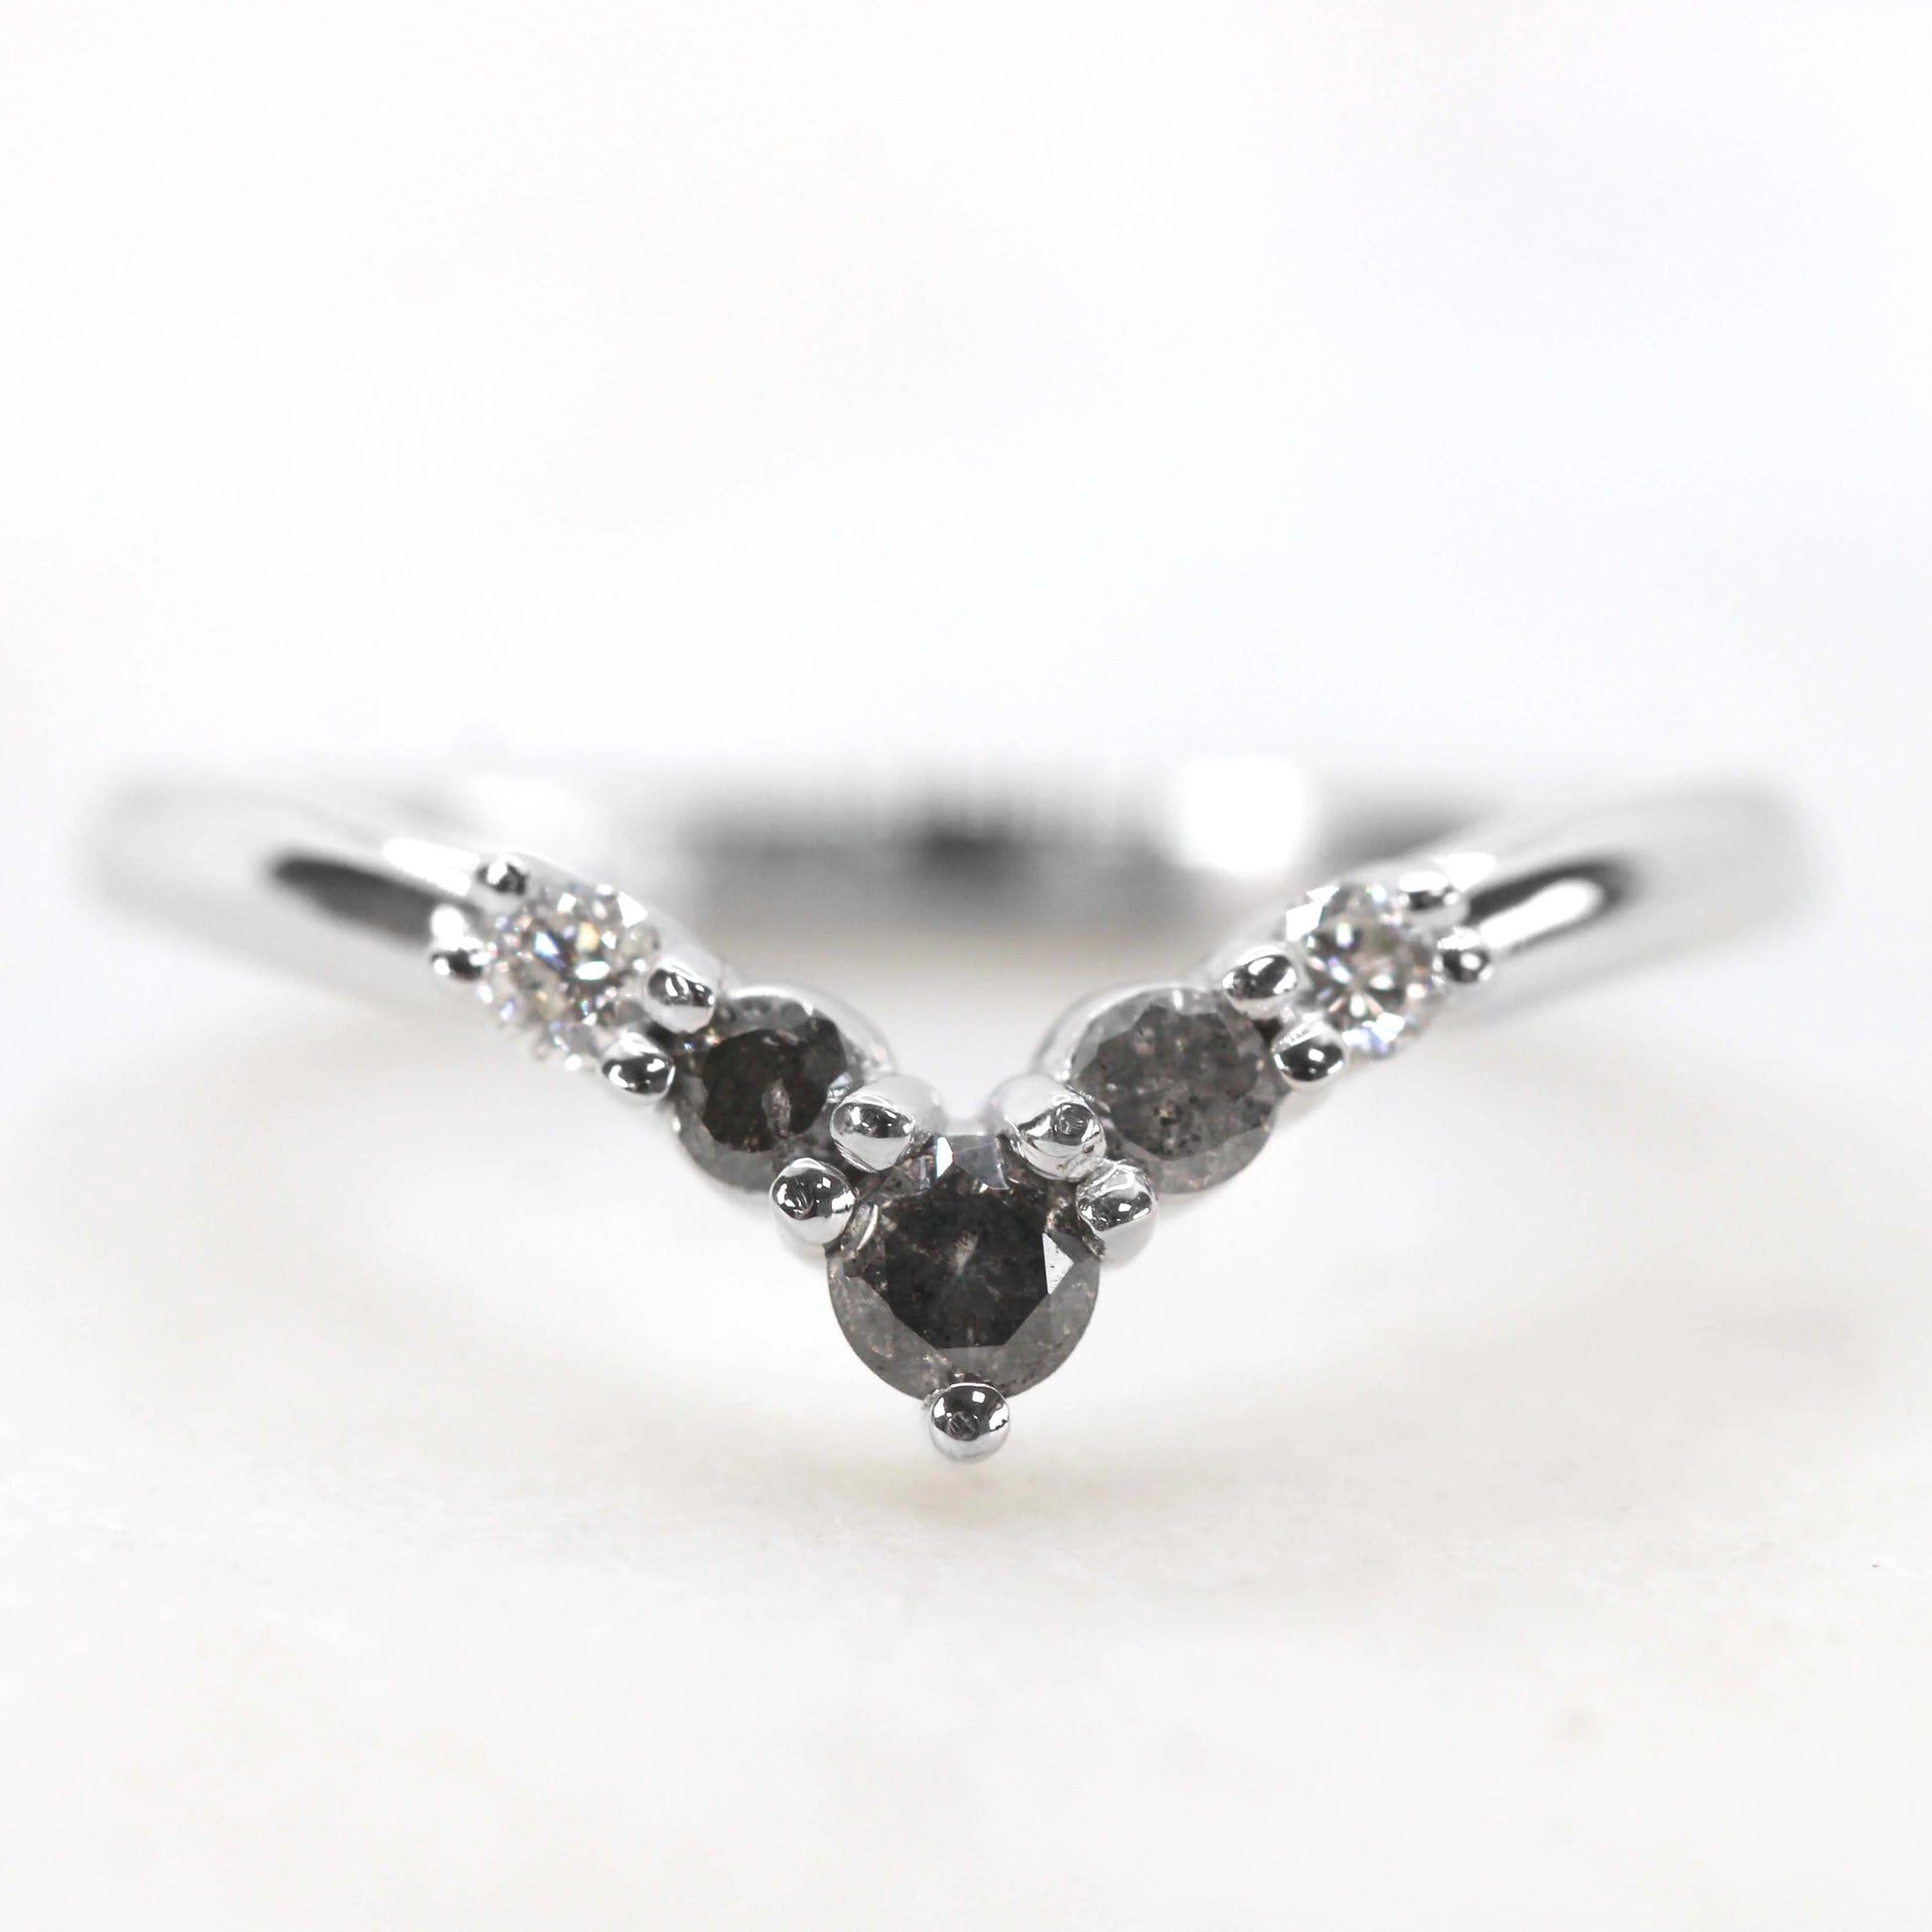 Rhiannon - Contour V-Shape Diamond Band with Gray Diamonds in Your Choice of 14K Gold - Midwinter Co. Alternative Bridal Rings and Modern Fine Jewelry